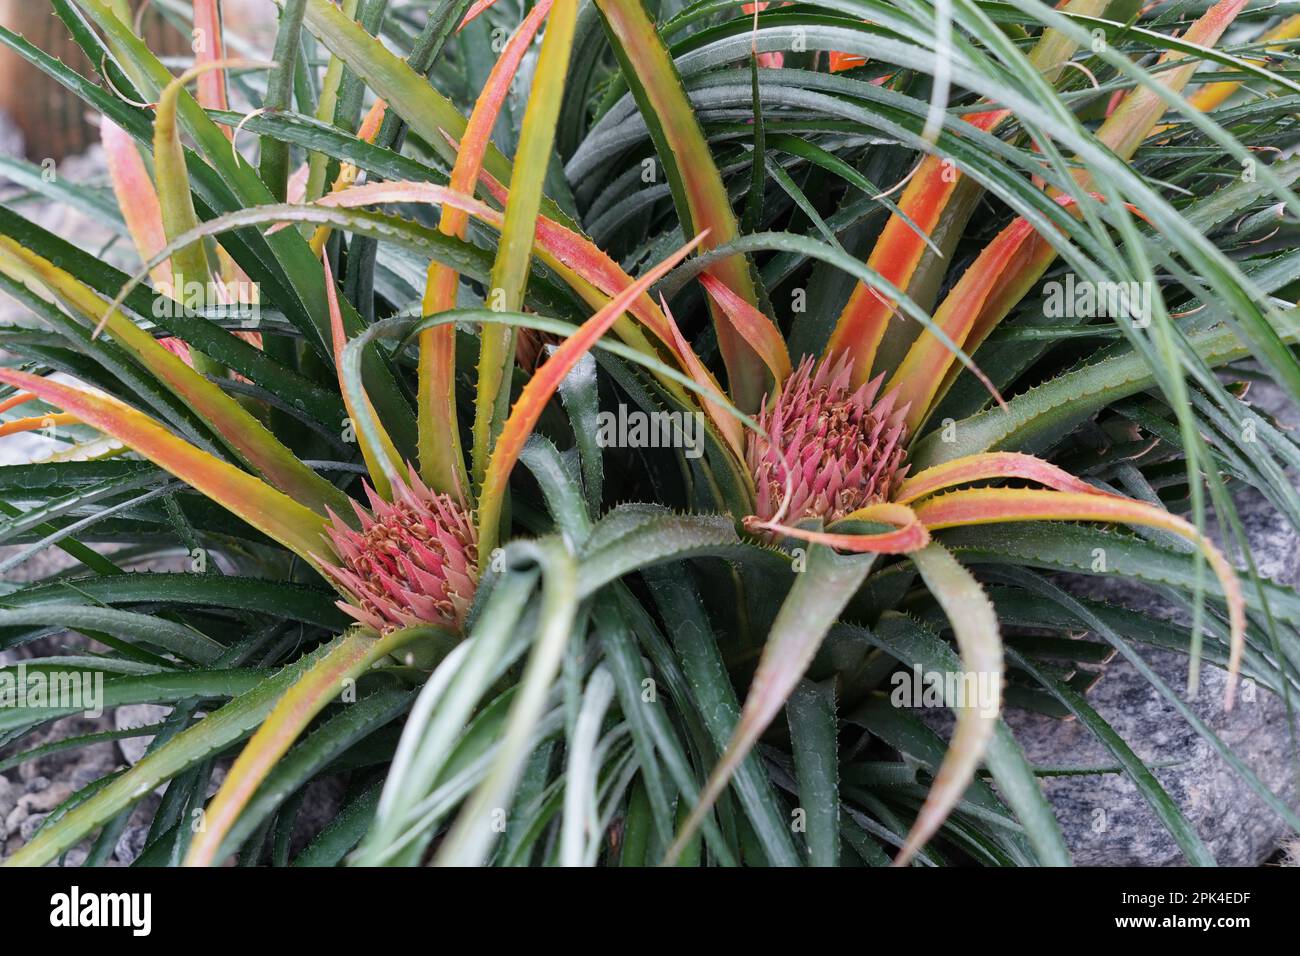 Exotic plant in Latin called Aechmea recurvata, part of family Bromeliaceae, captured in high angle view with two rosettes of leaves with flowers. Stock Photo